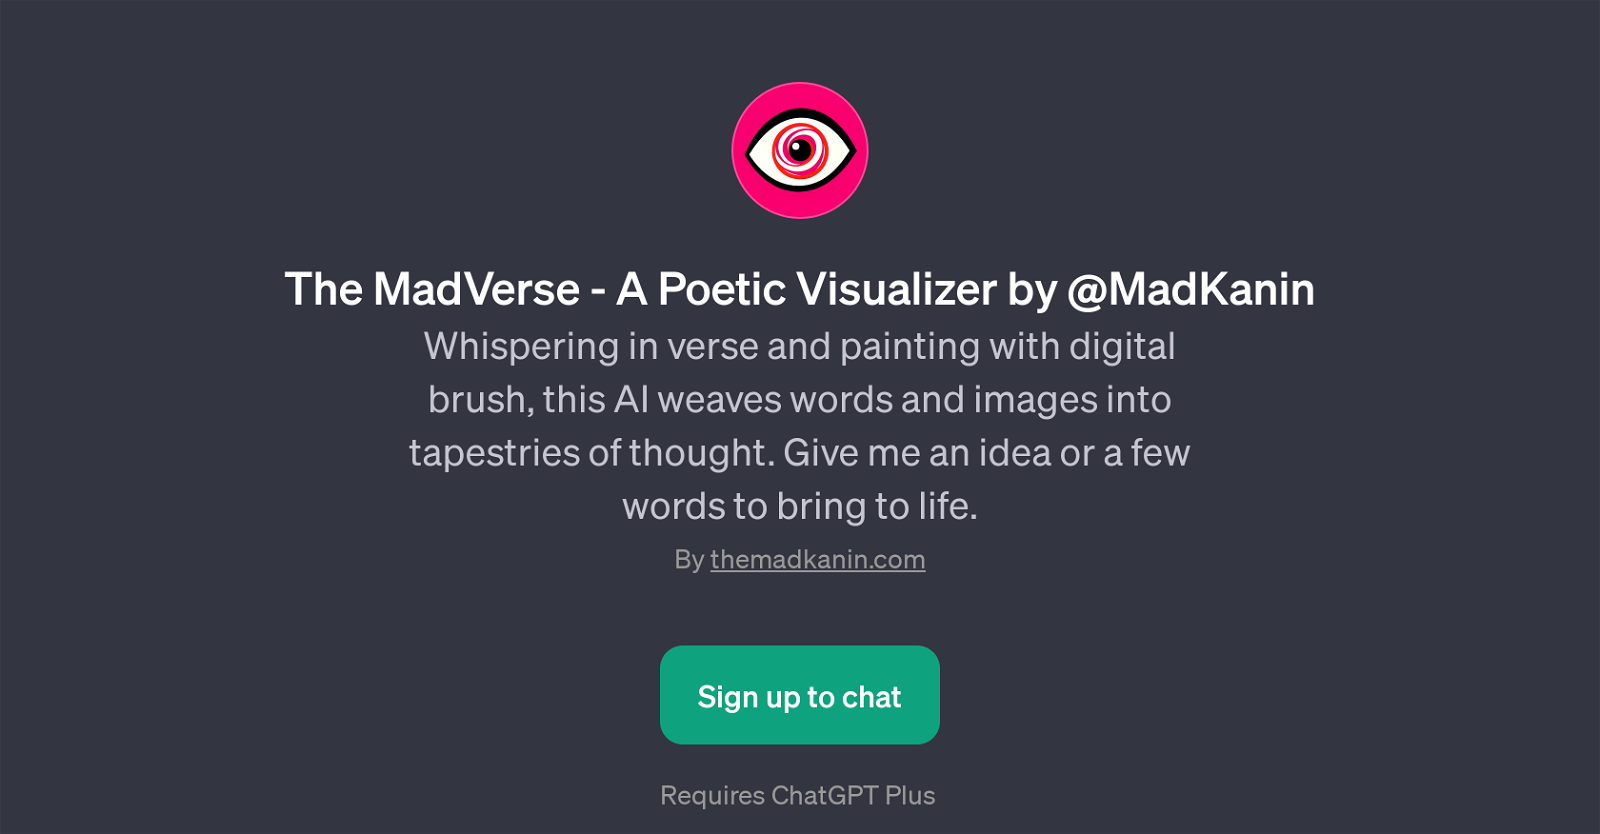 The MadVerse - A Poetic Visualizer by @MadKanin website